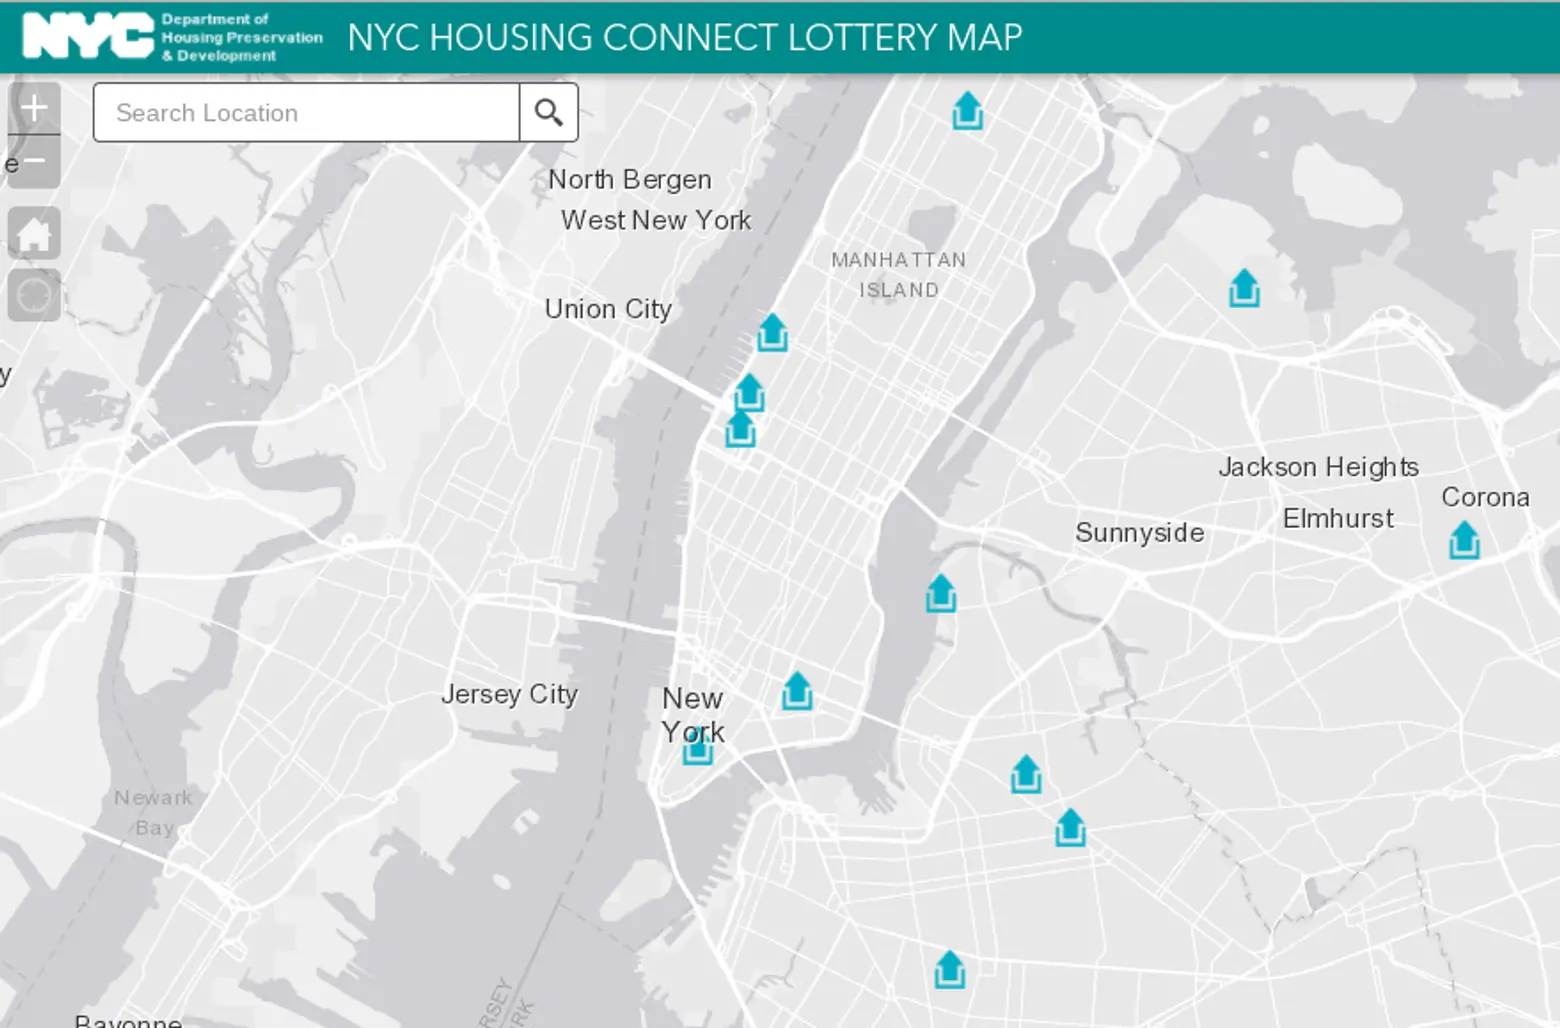 Find and apply for current affordable housing lotteries in NYC with this new map